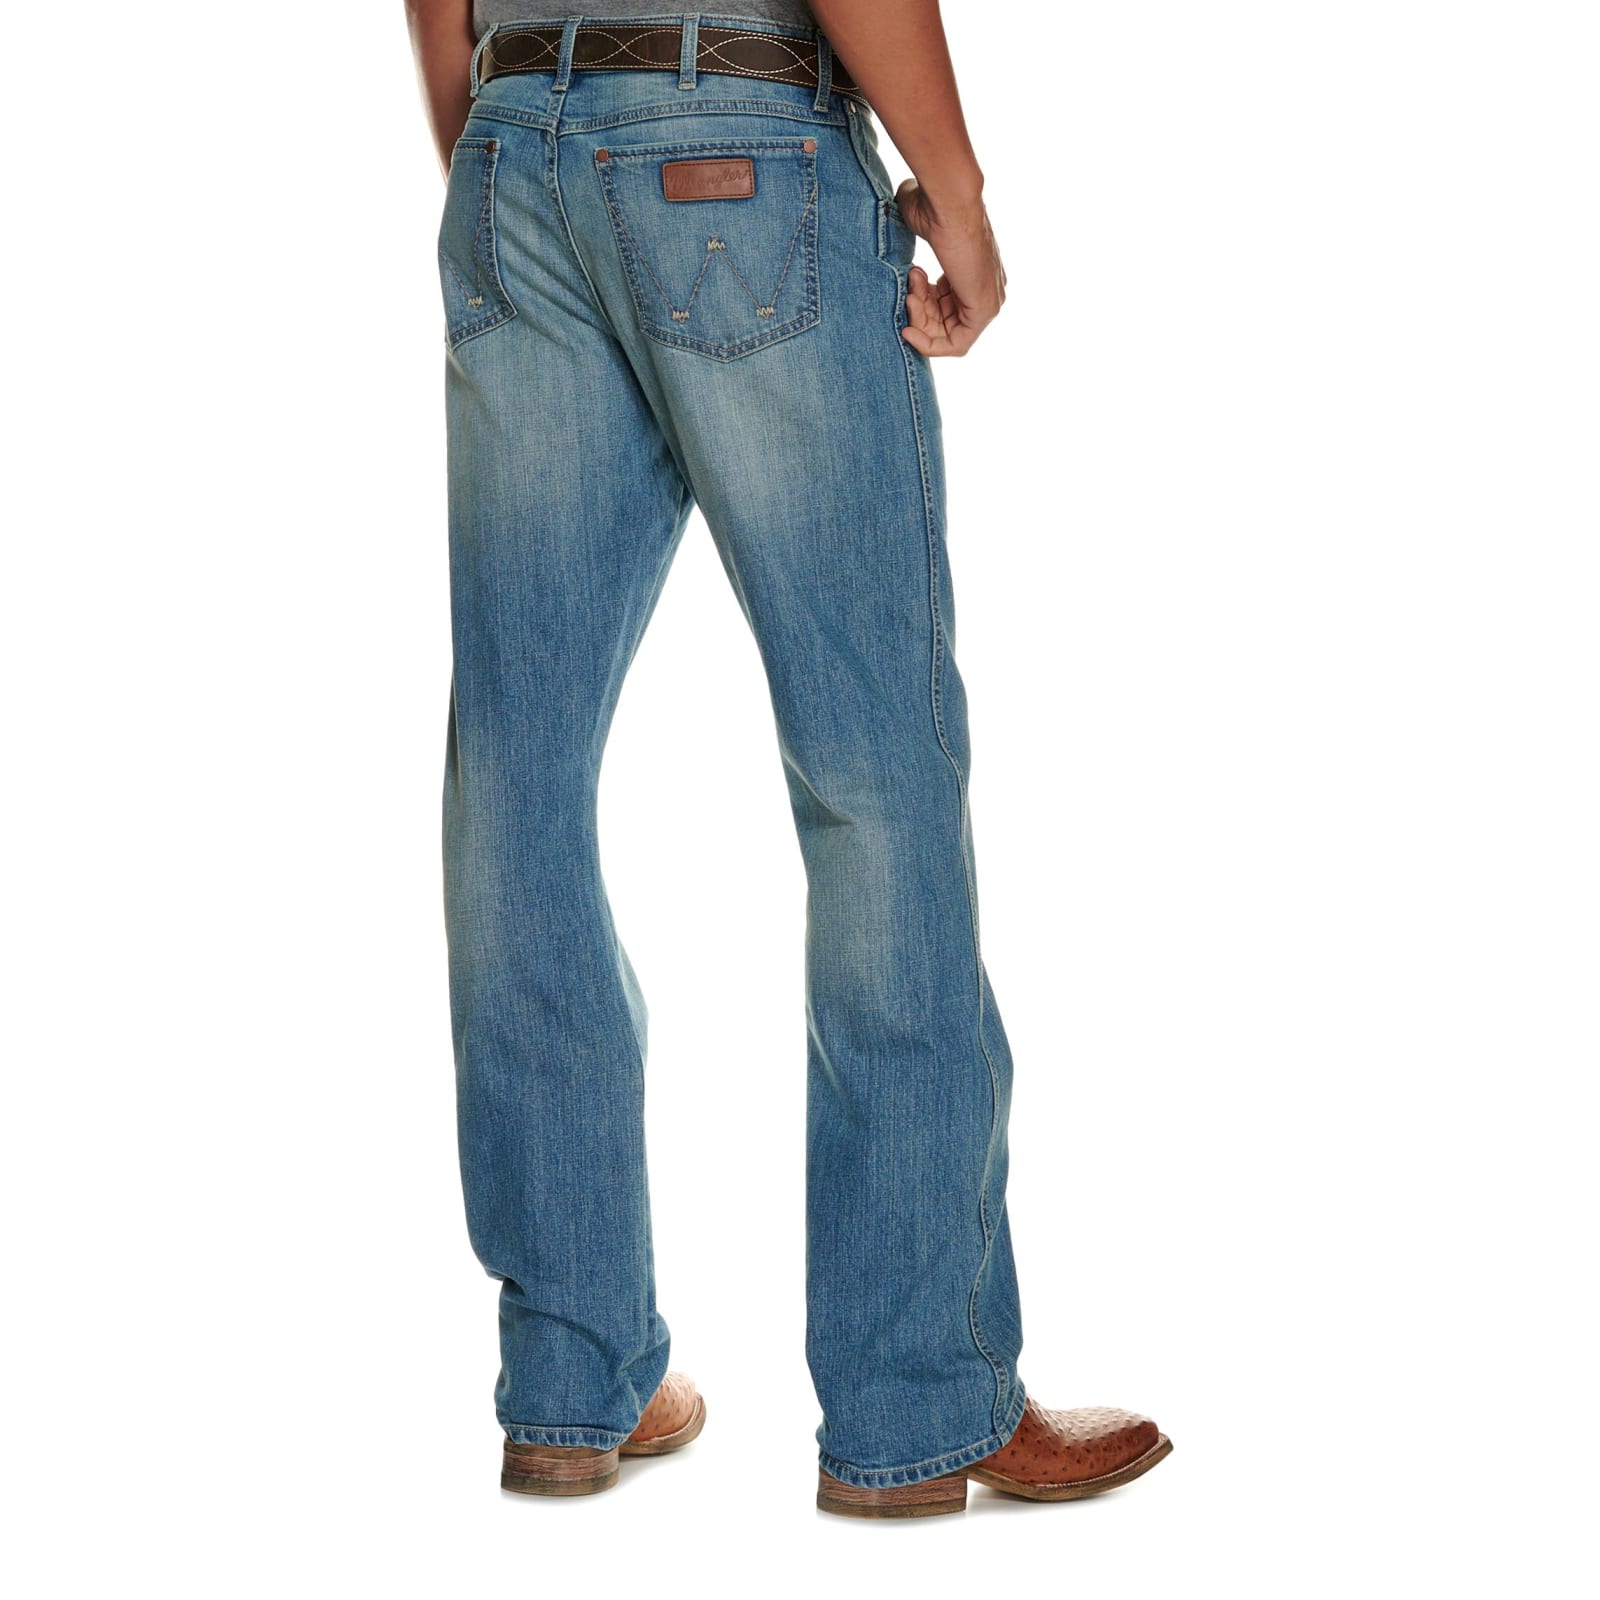 Wrangler Retro Men's Light Wash Relaxed Fit Boot Cut Jeans - Cavender's  Exclusive available at Cavenders